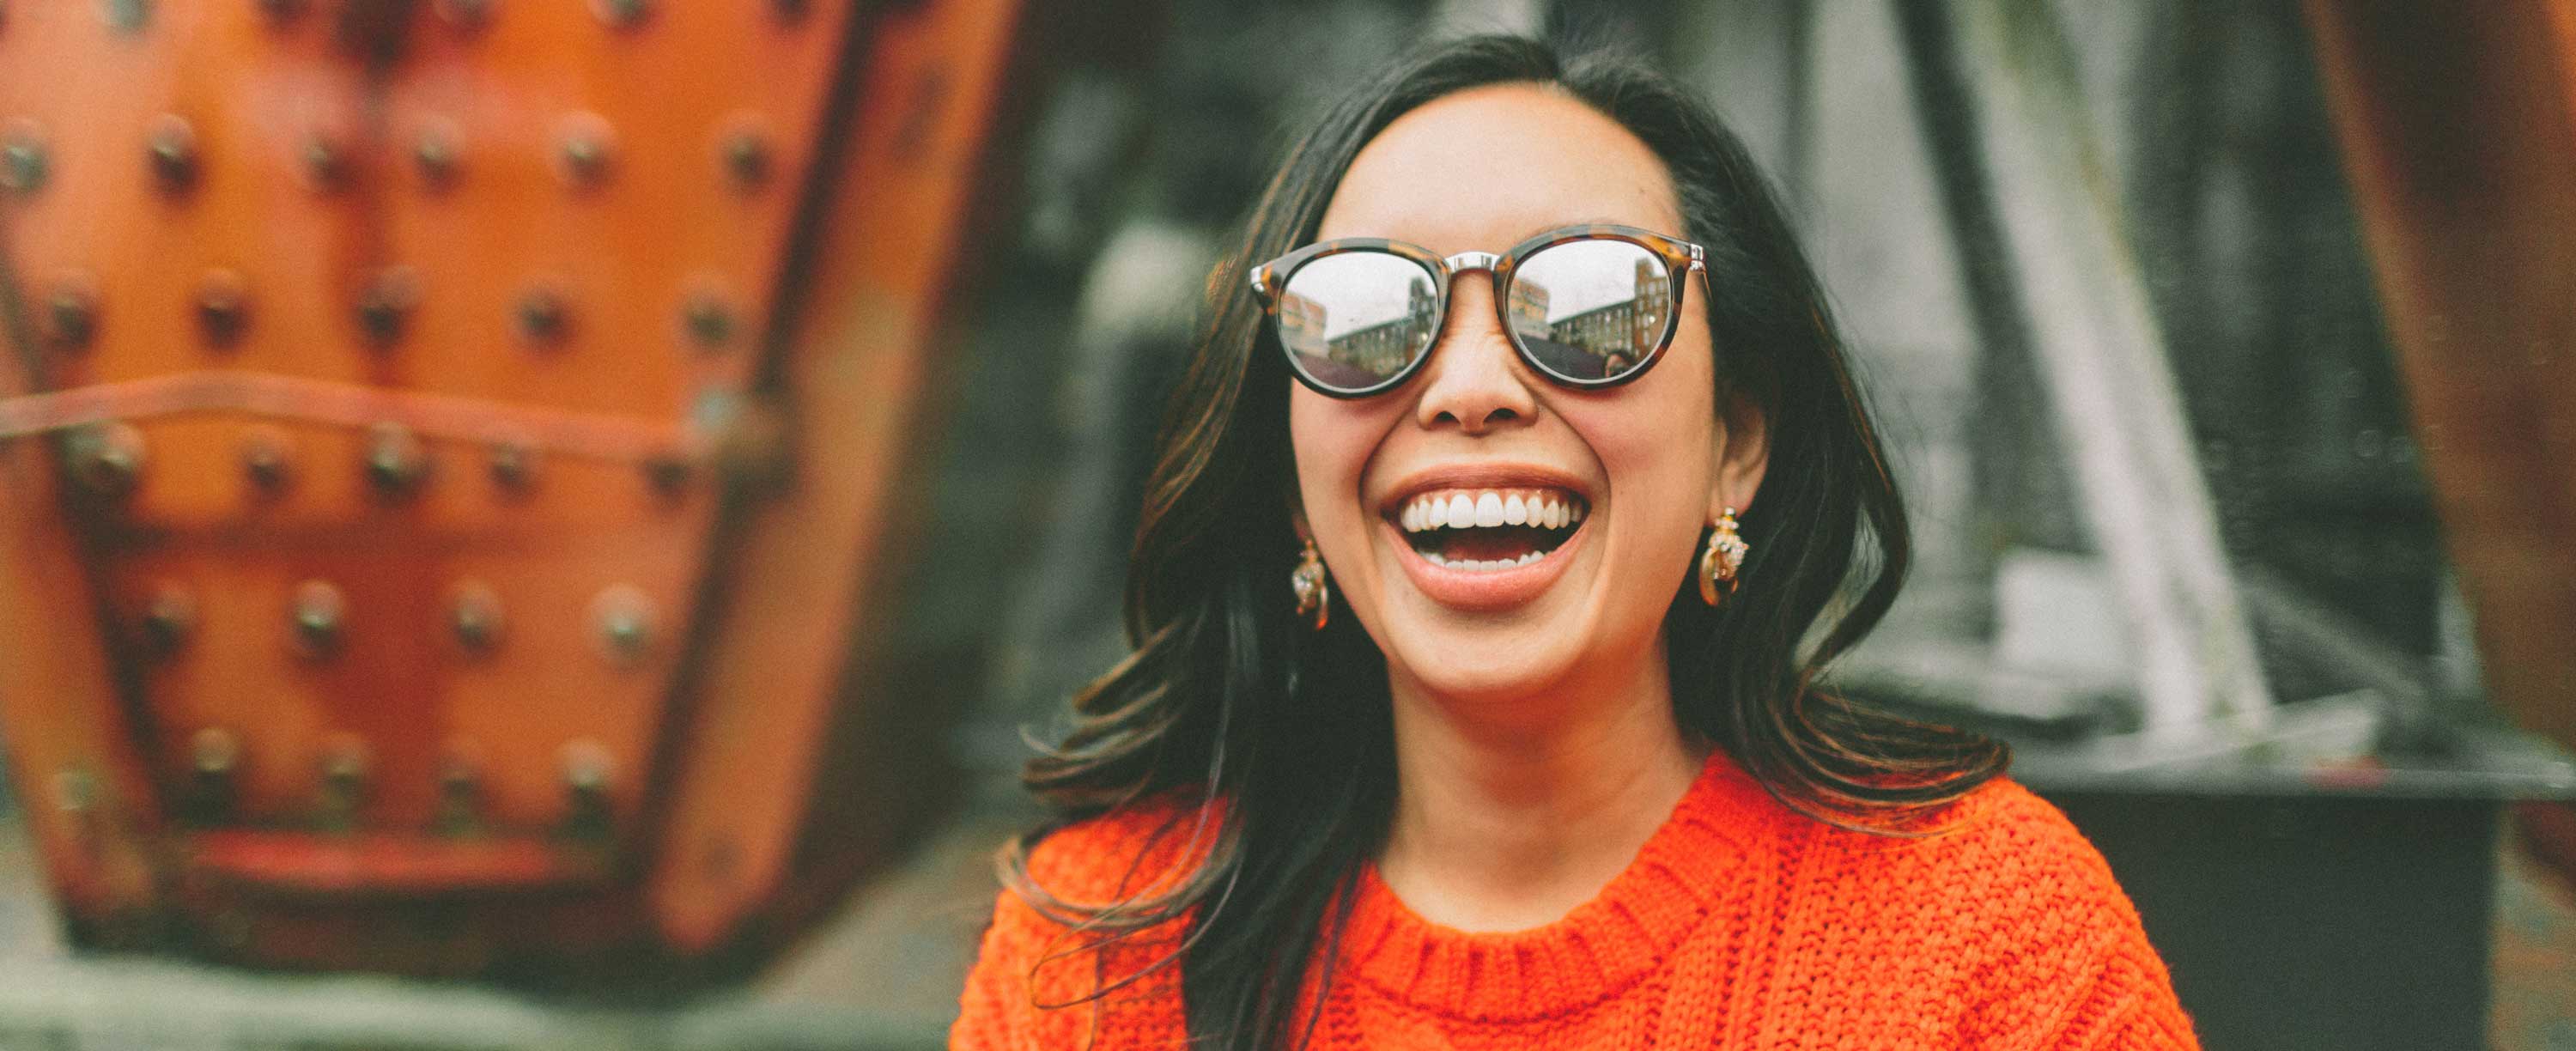 happy smiling woman wearing sunglasses